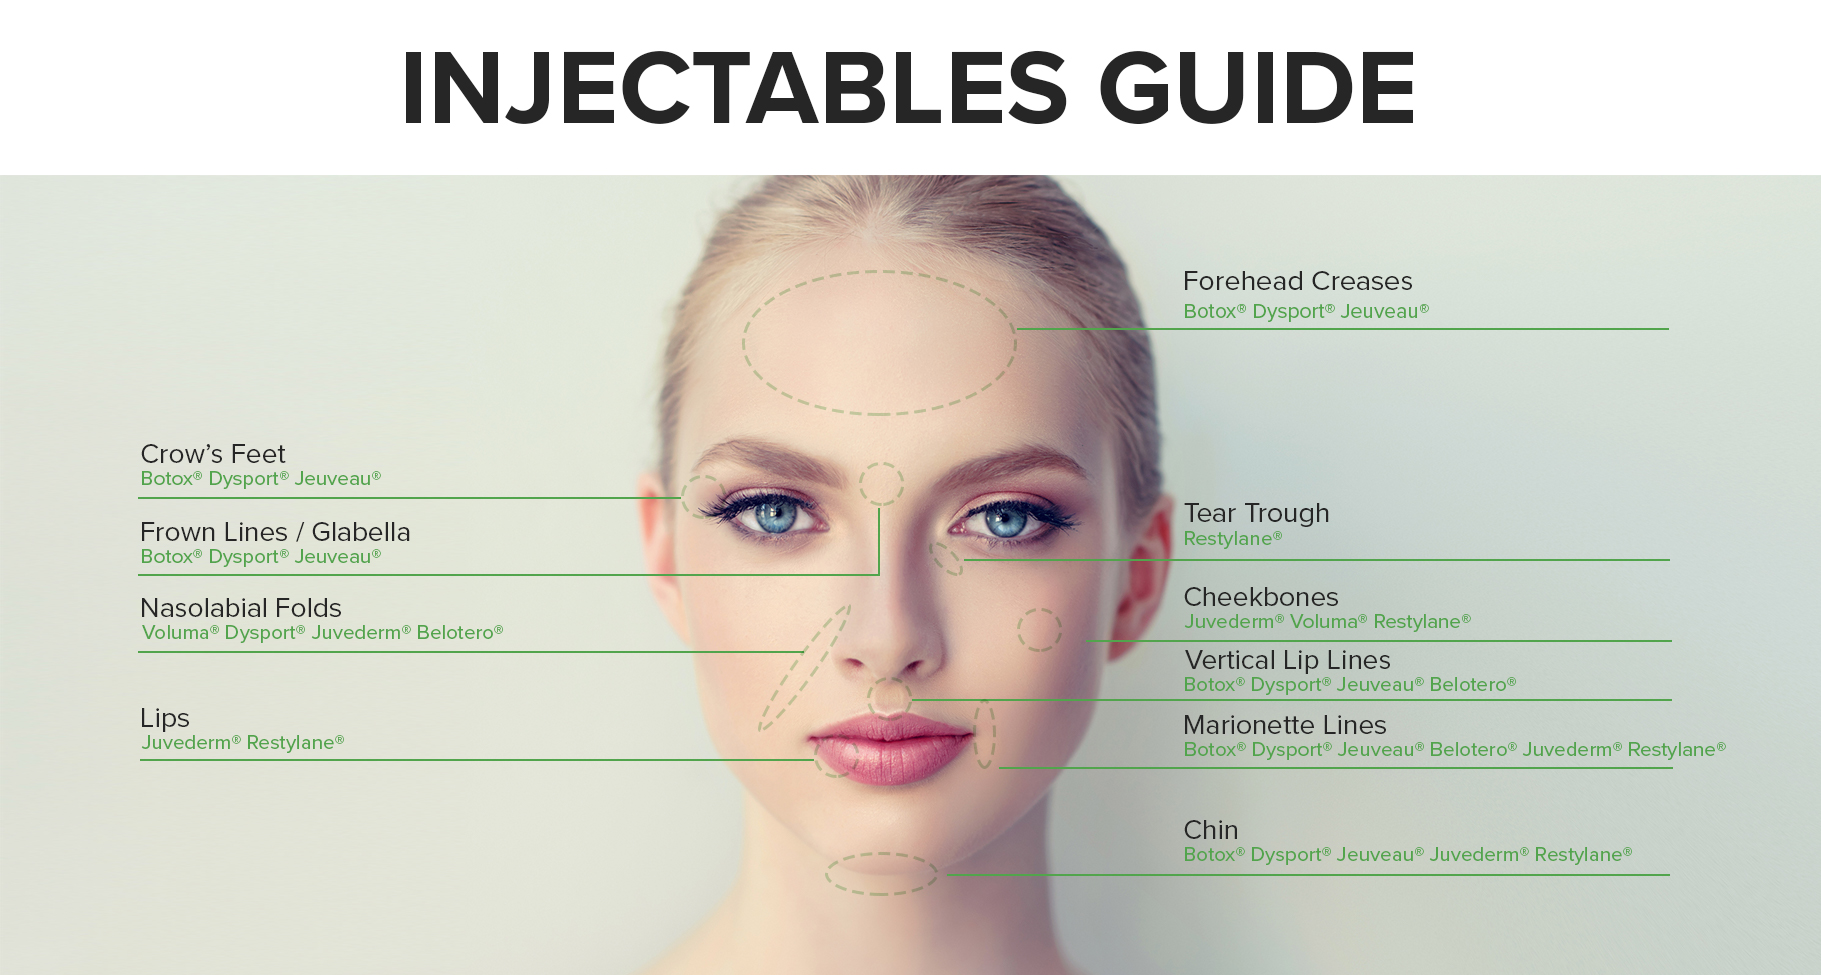 Where Injectables are used on the face